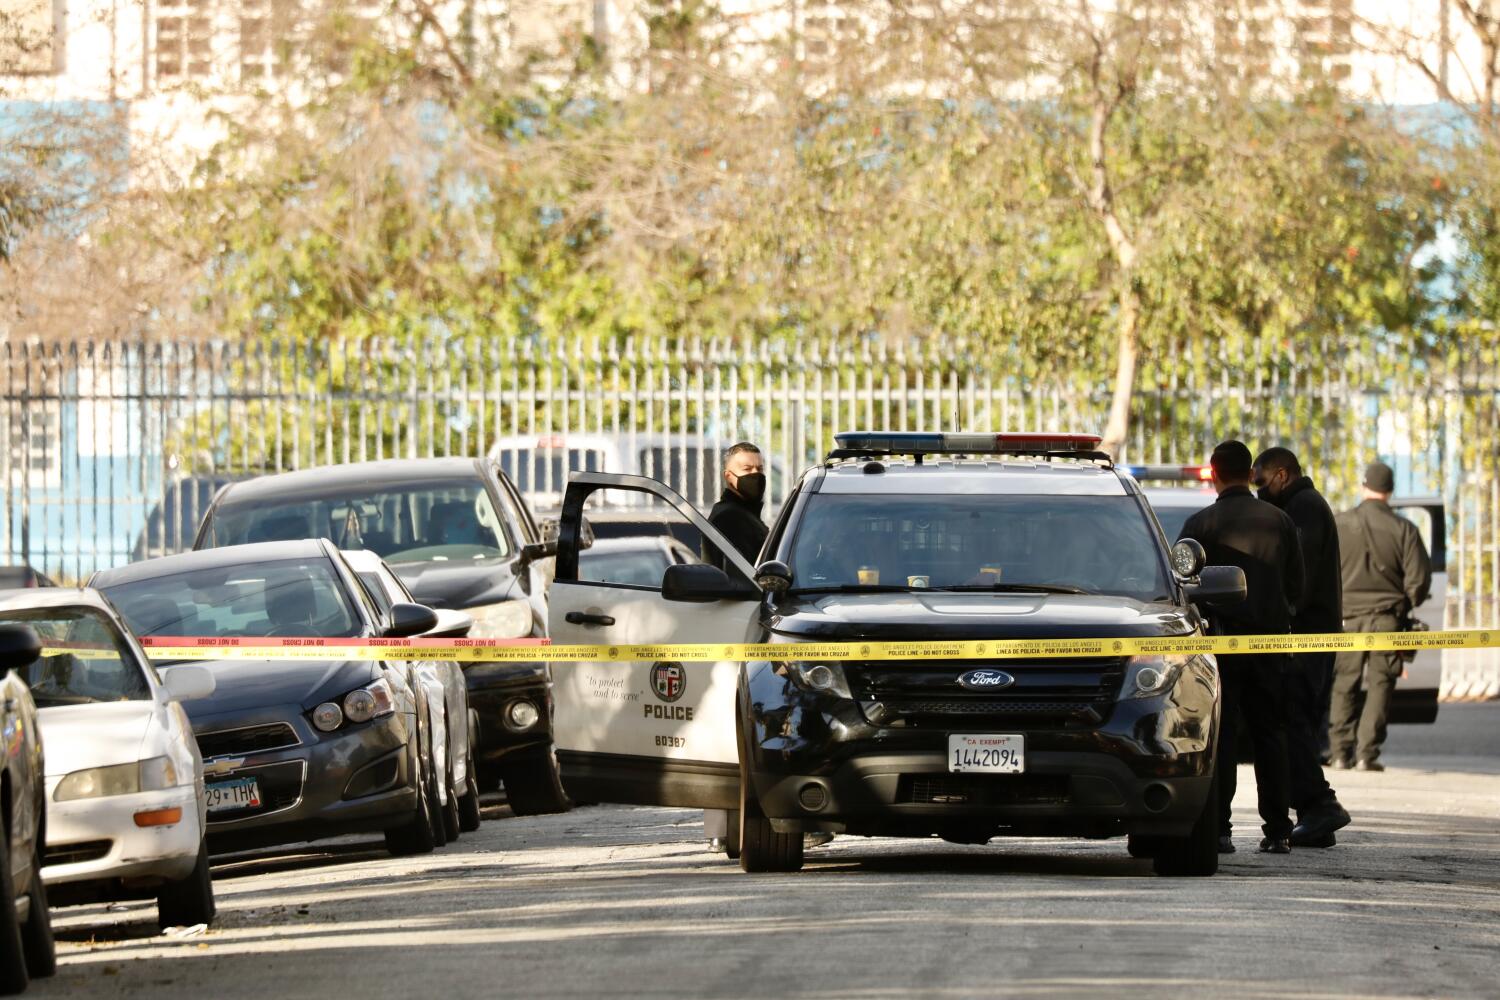 'Bringing a gun to a knife fight': LAPD continues to shoot people holding 'edged weapon' during mental crisis, analysis shows